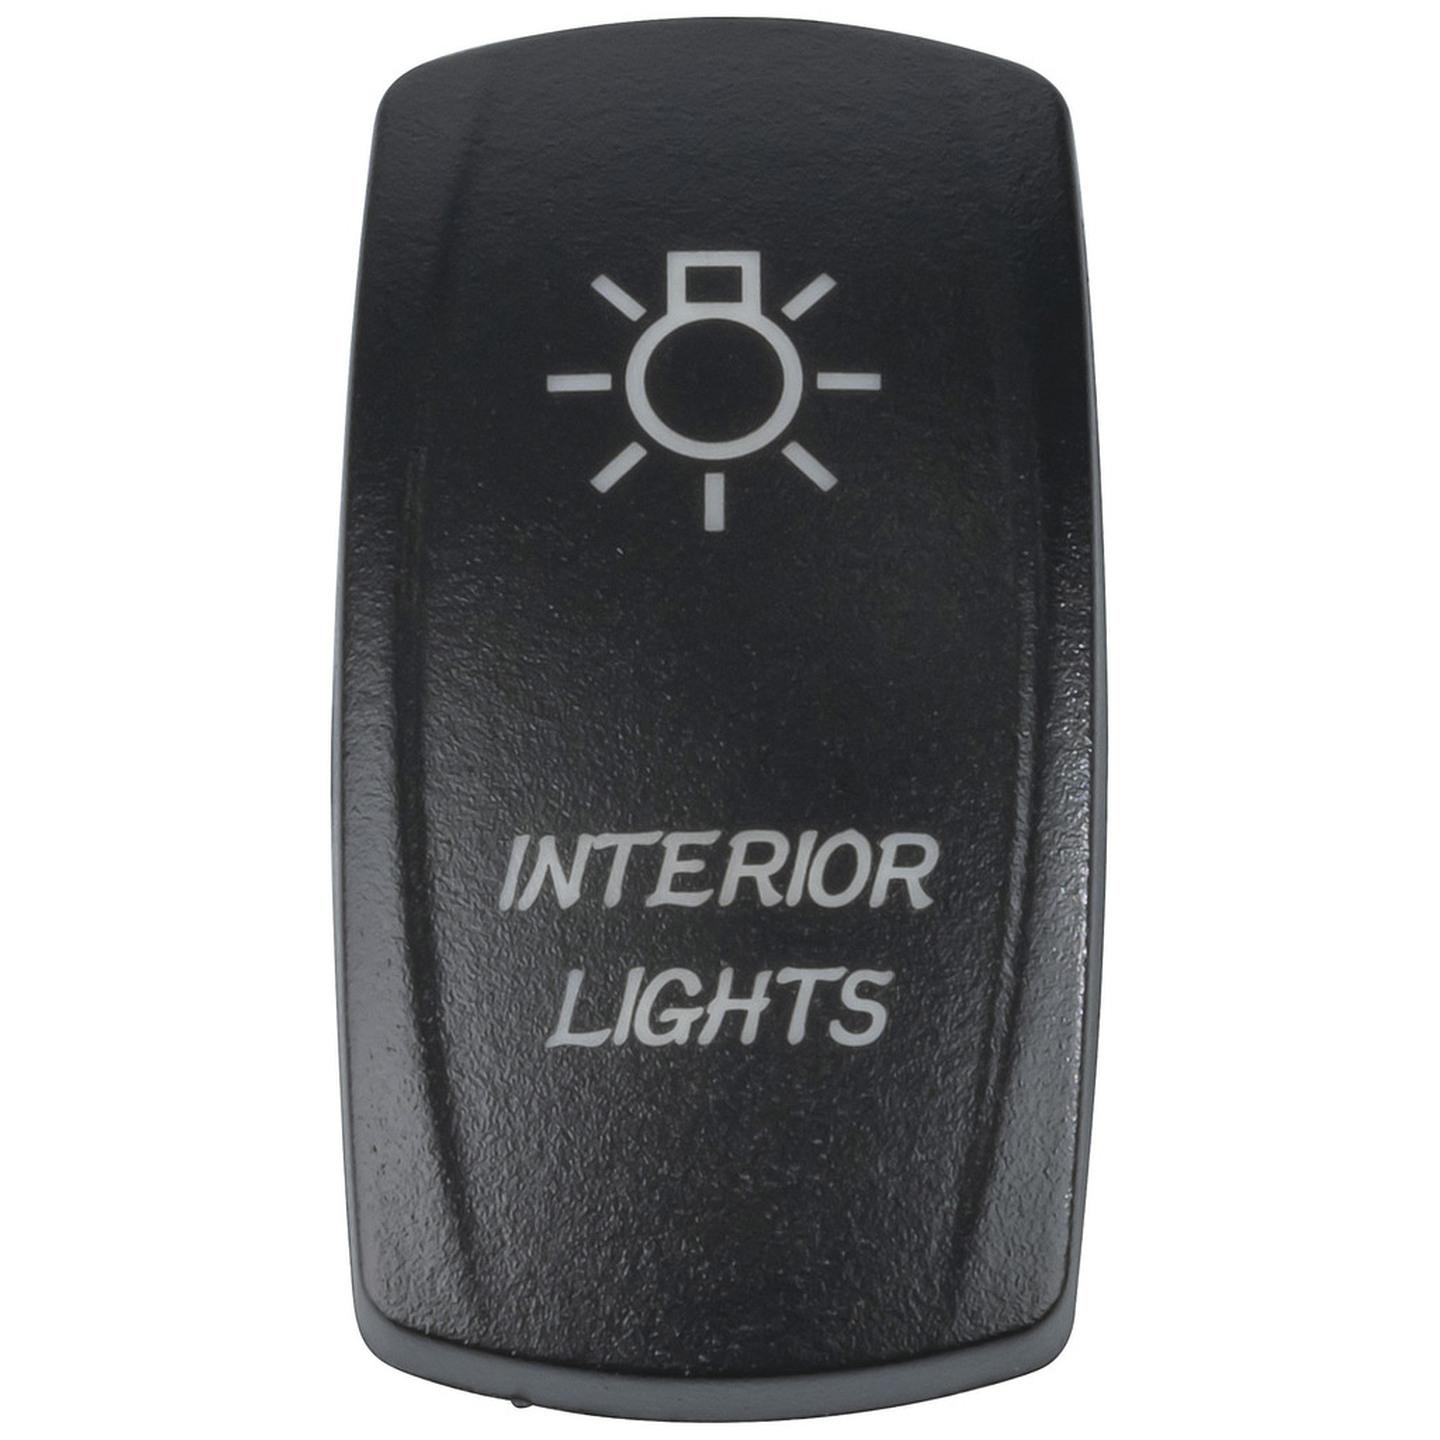 Laser Etched Interior Light Cover for Illuminated Rocker Switch